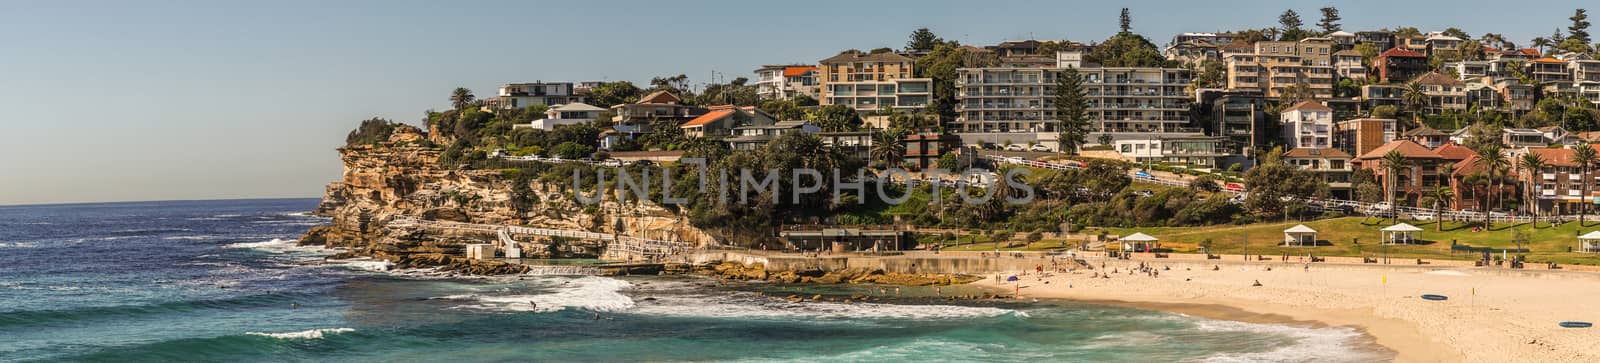 Panorama shot of Bronte Beach seen from North shore cliffs, Sydn by Claudine